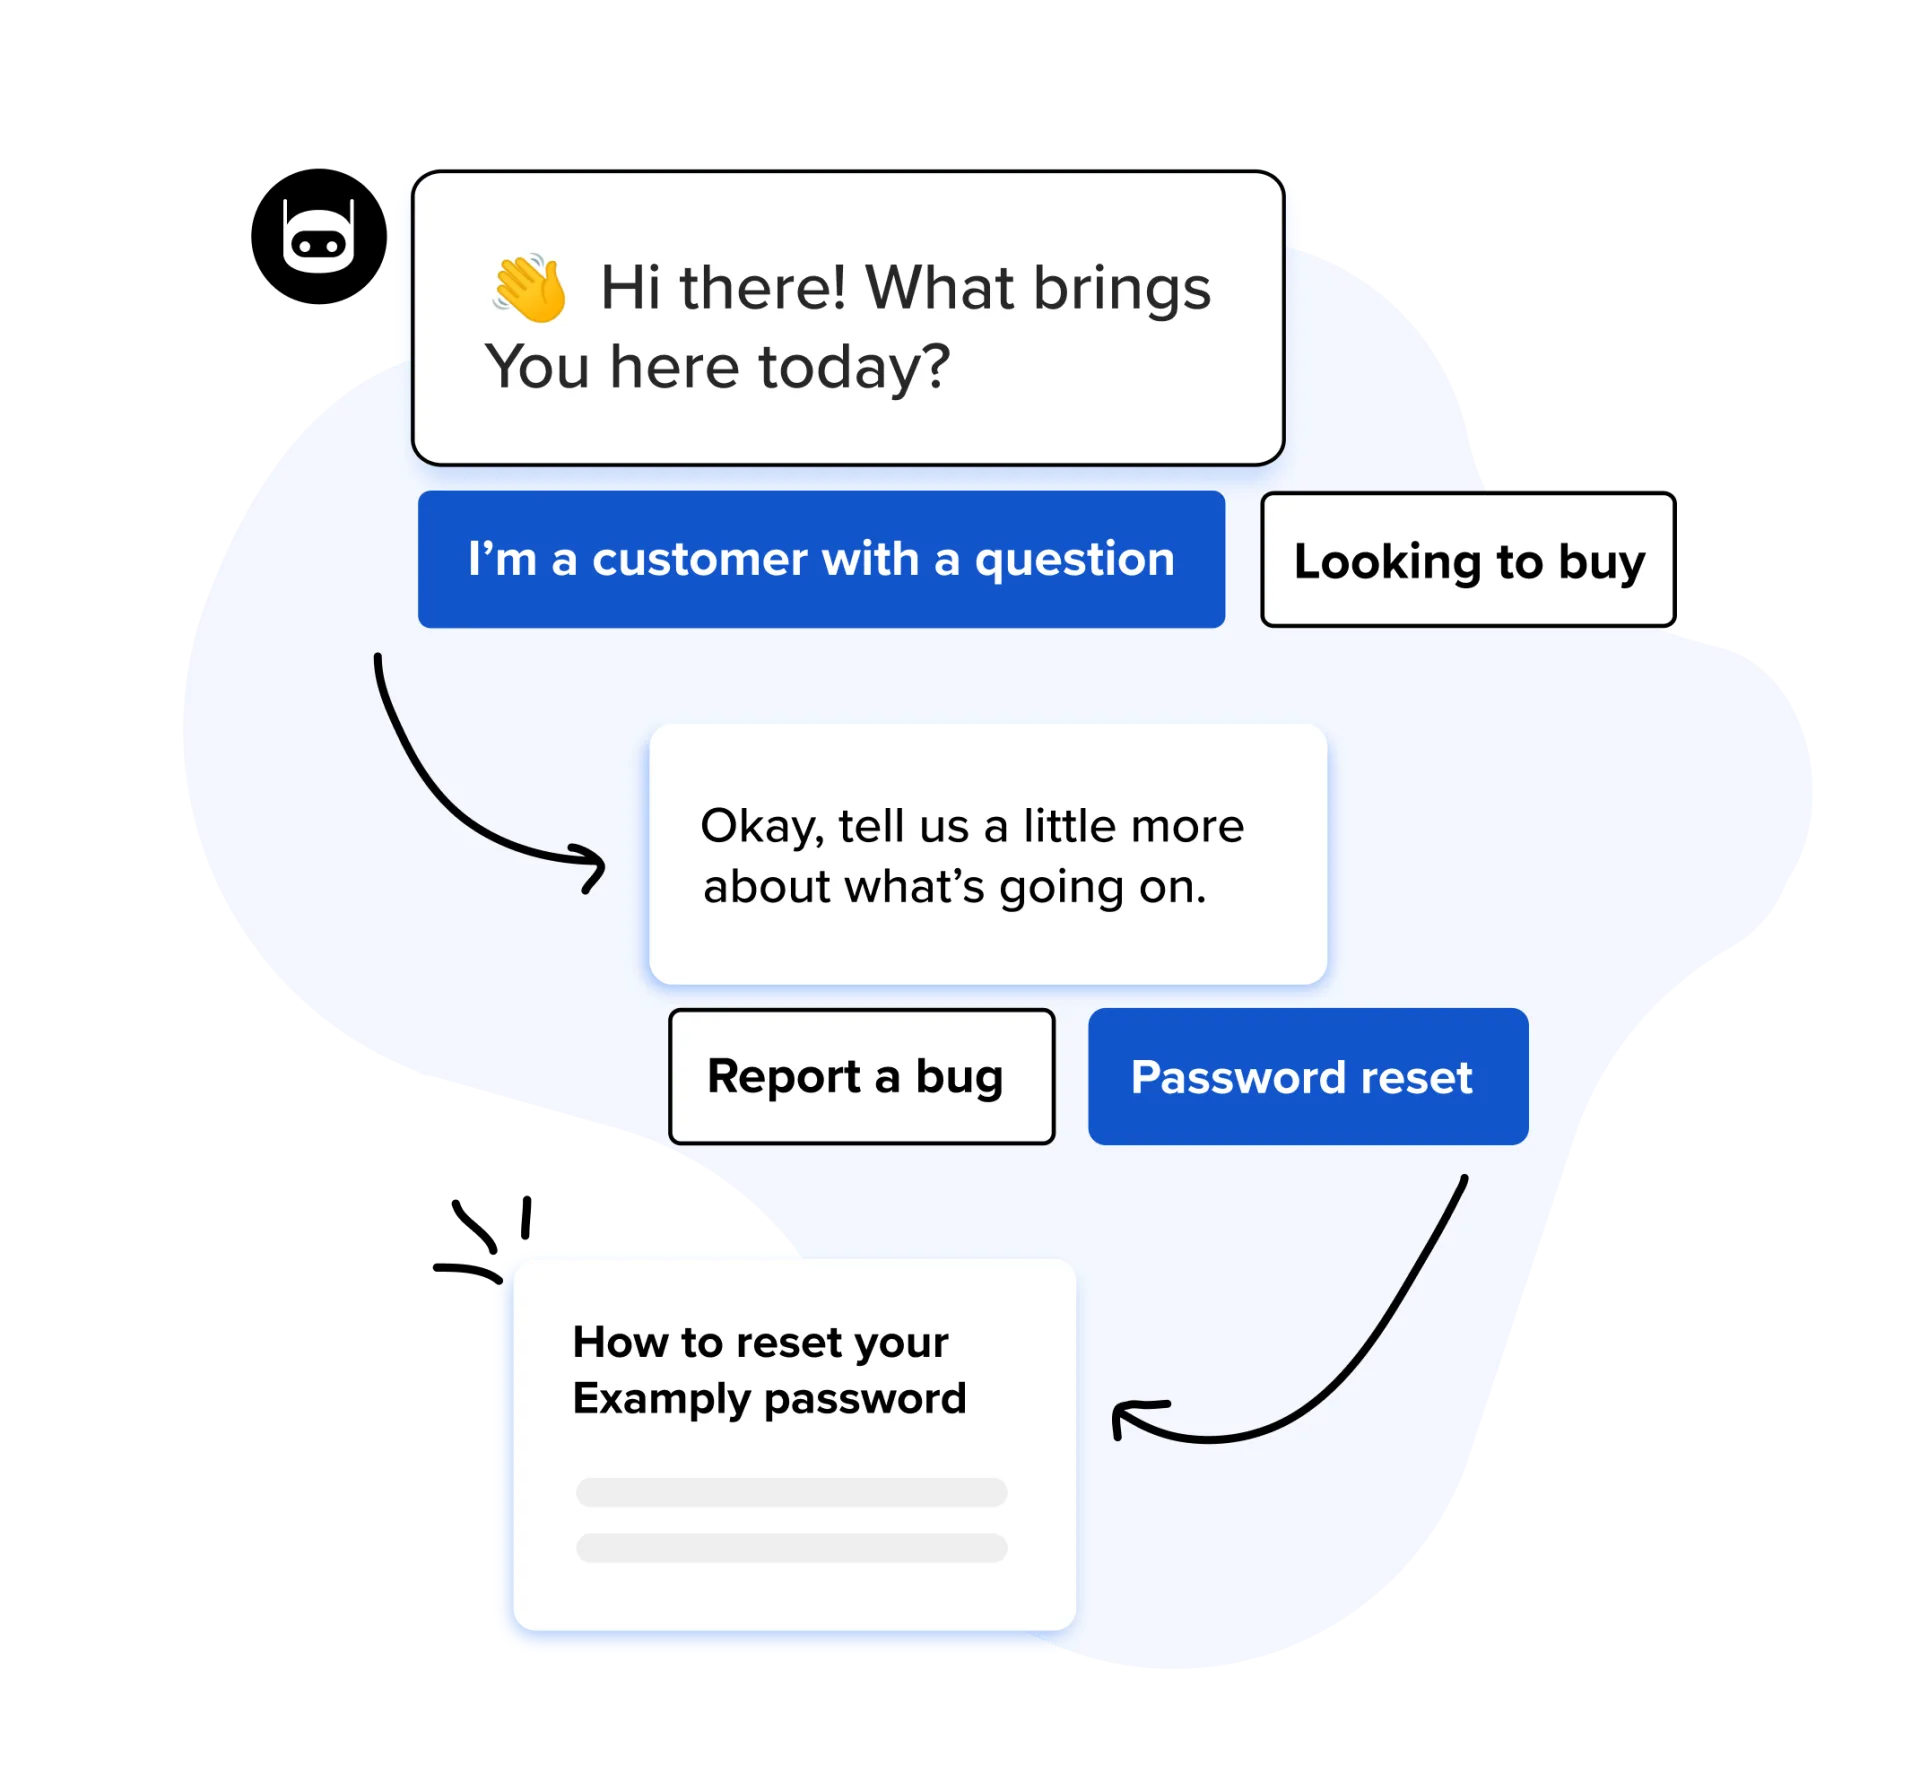 A chatbot assisting a user with resetting their password